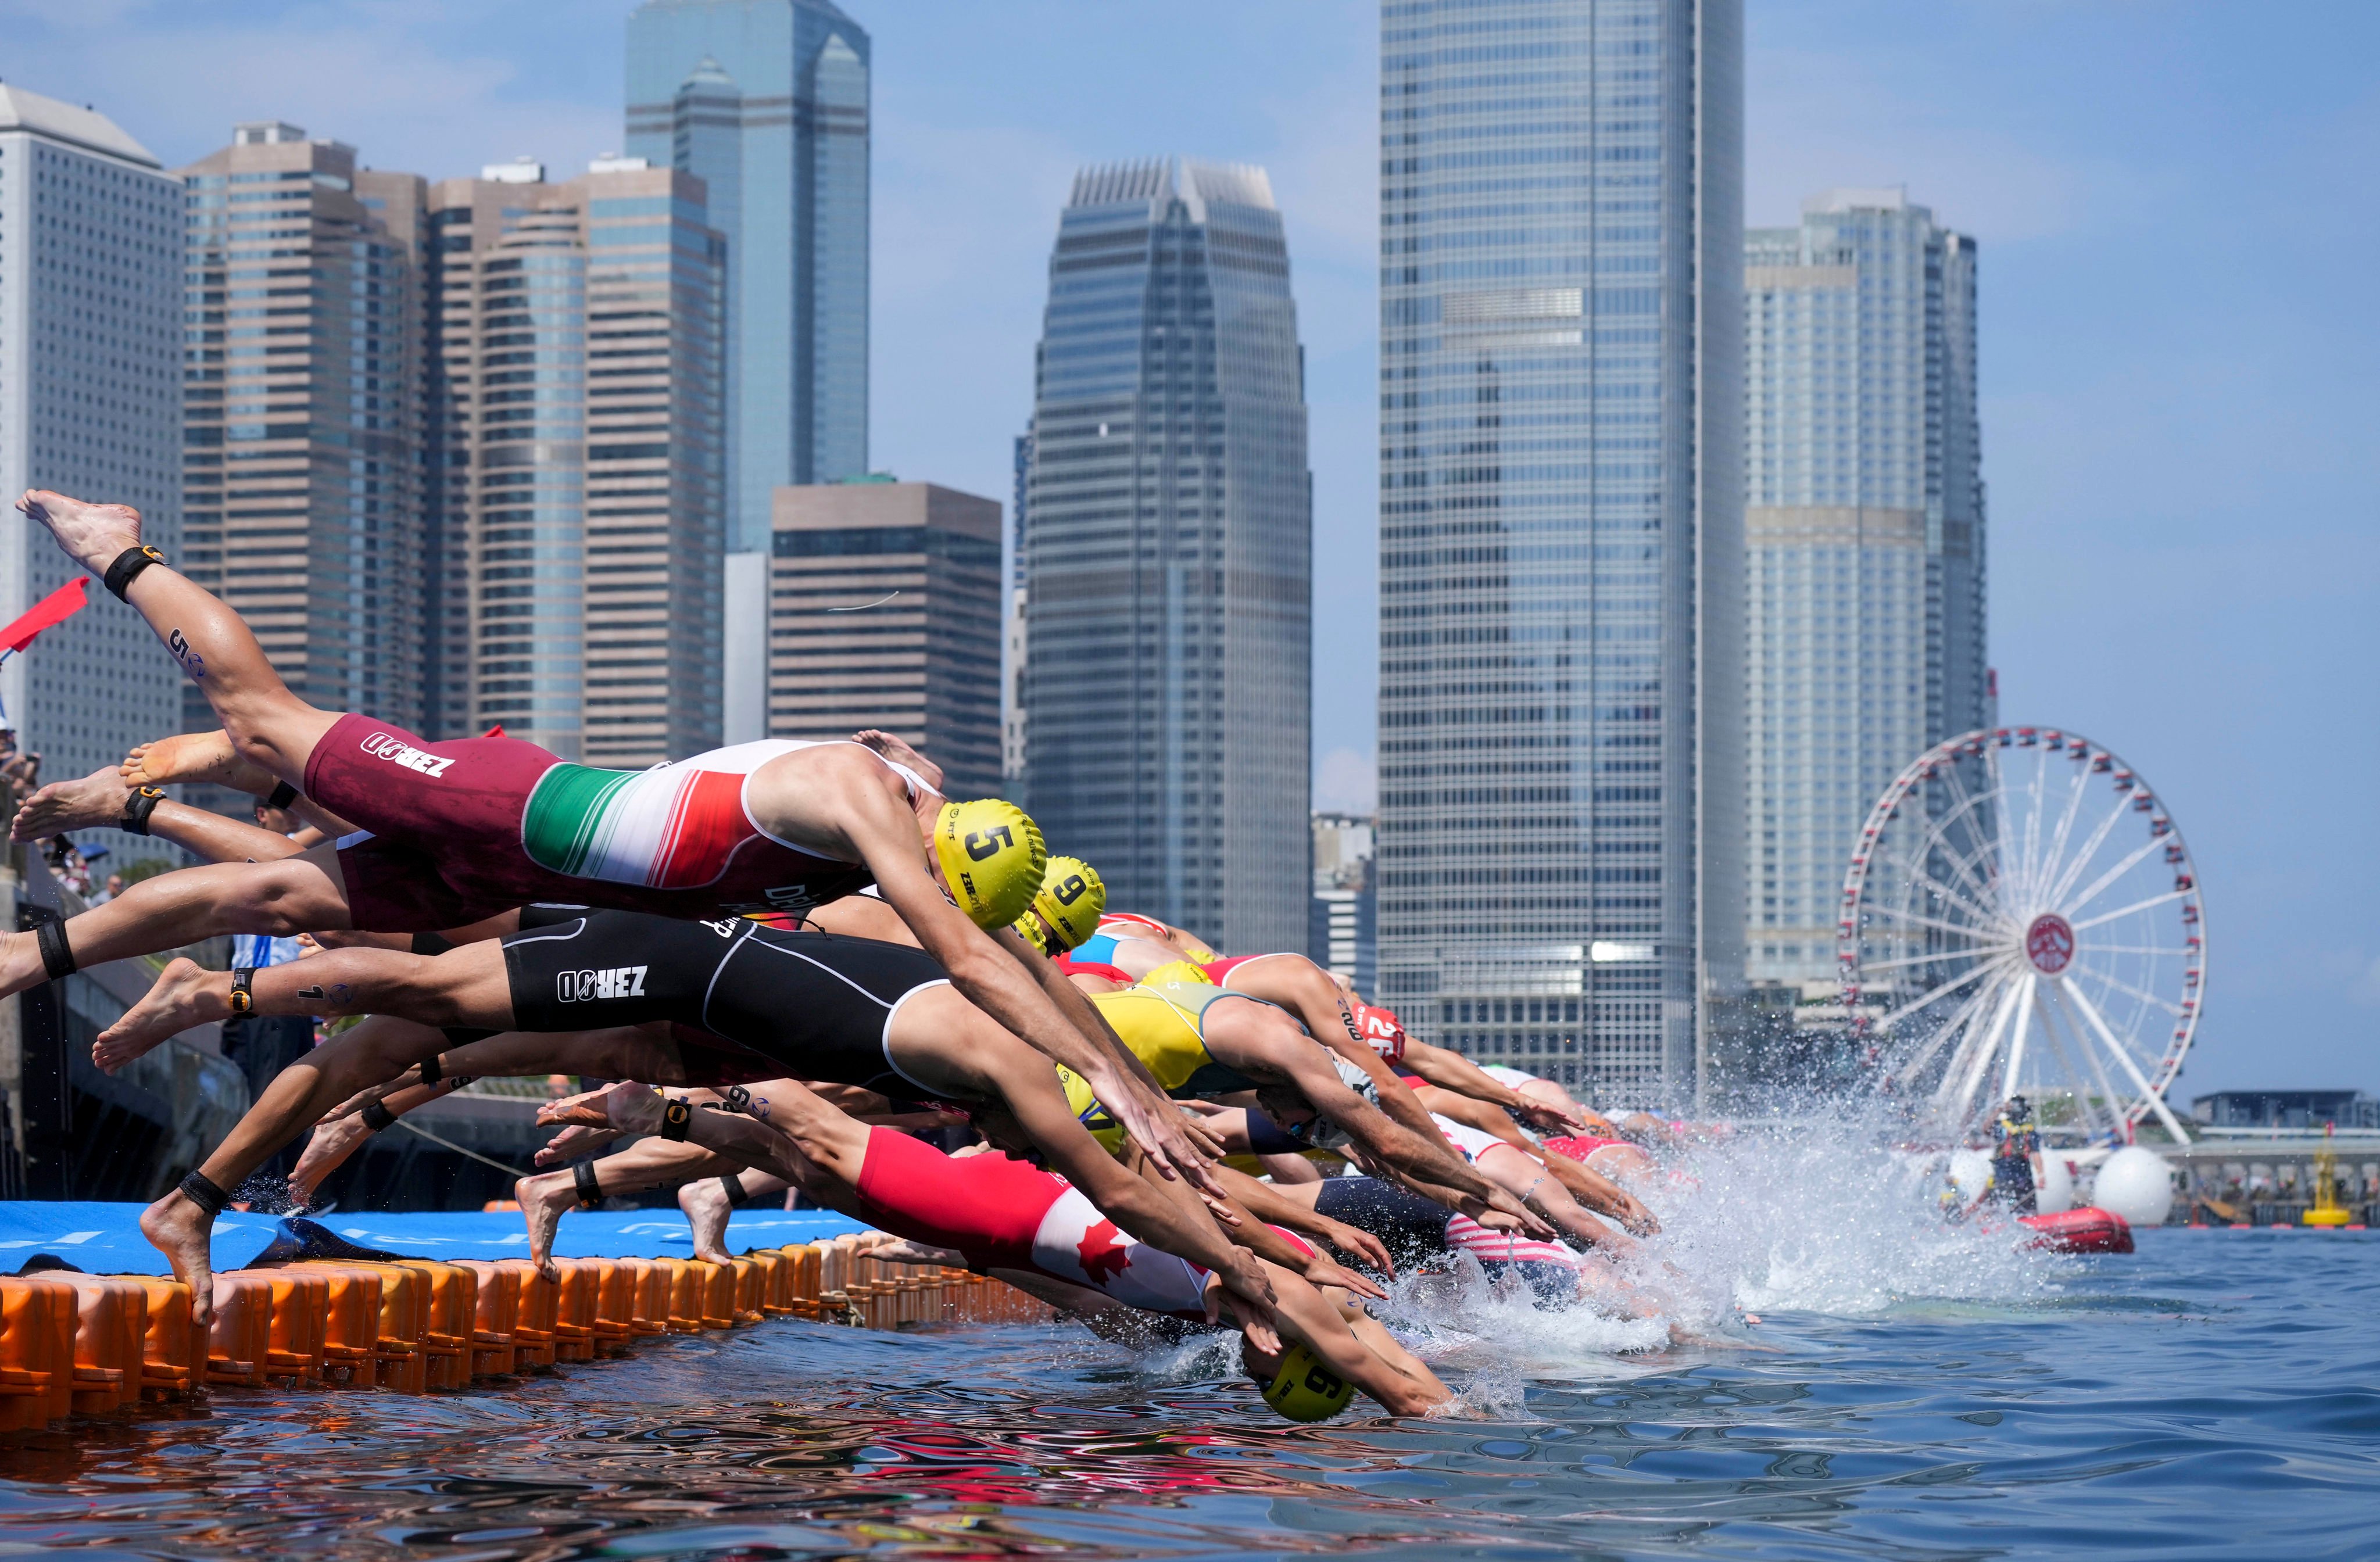 Competitors take the plunge at the Triathlon World Cup held in Hong Kong last month. The National Games event will also be held at Victoria Harbour. Photo: Elson Li